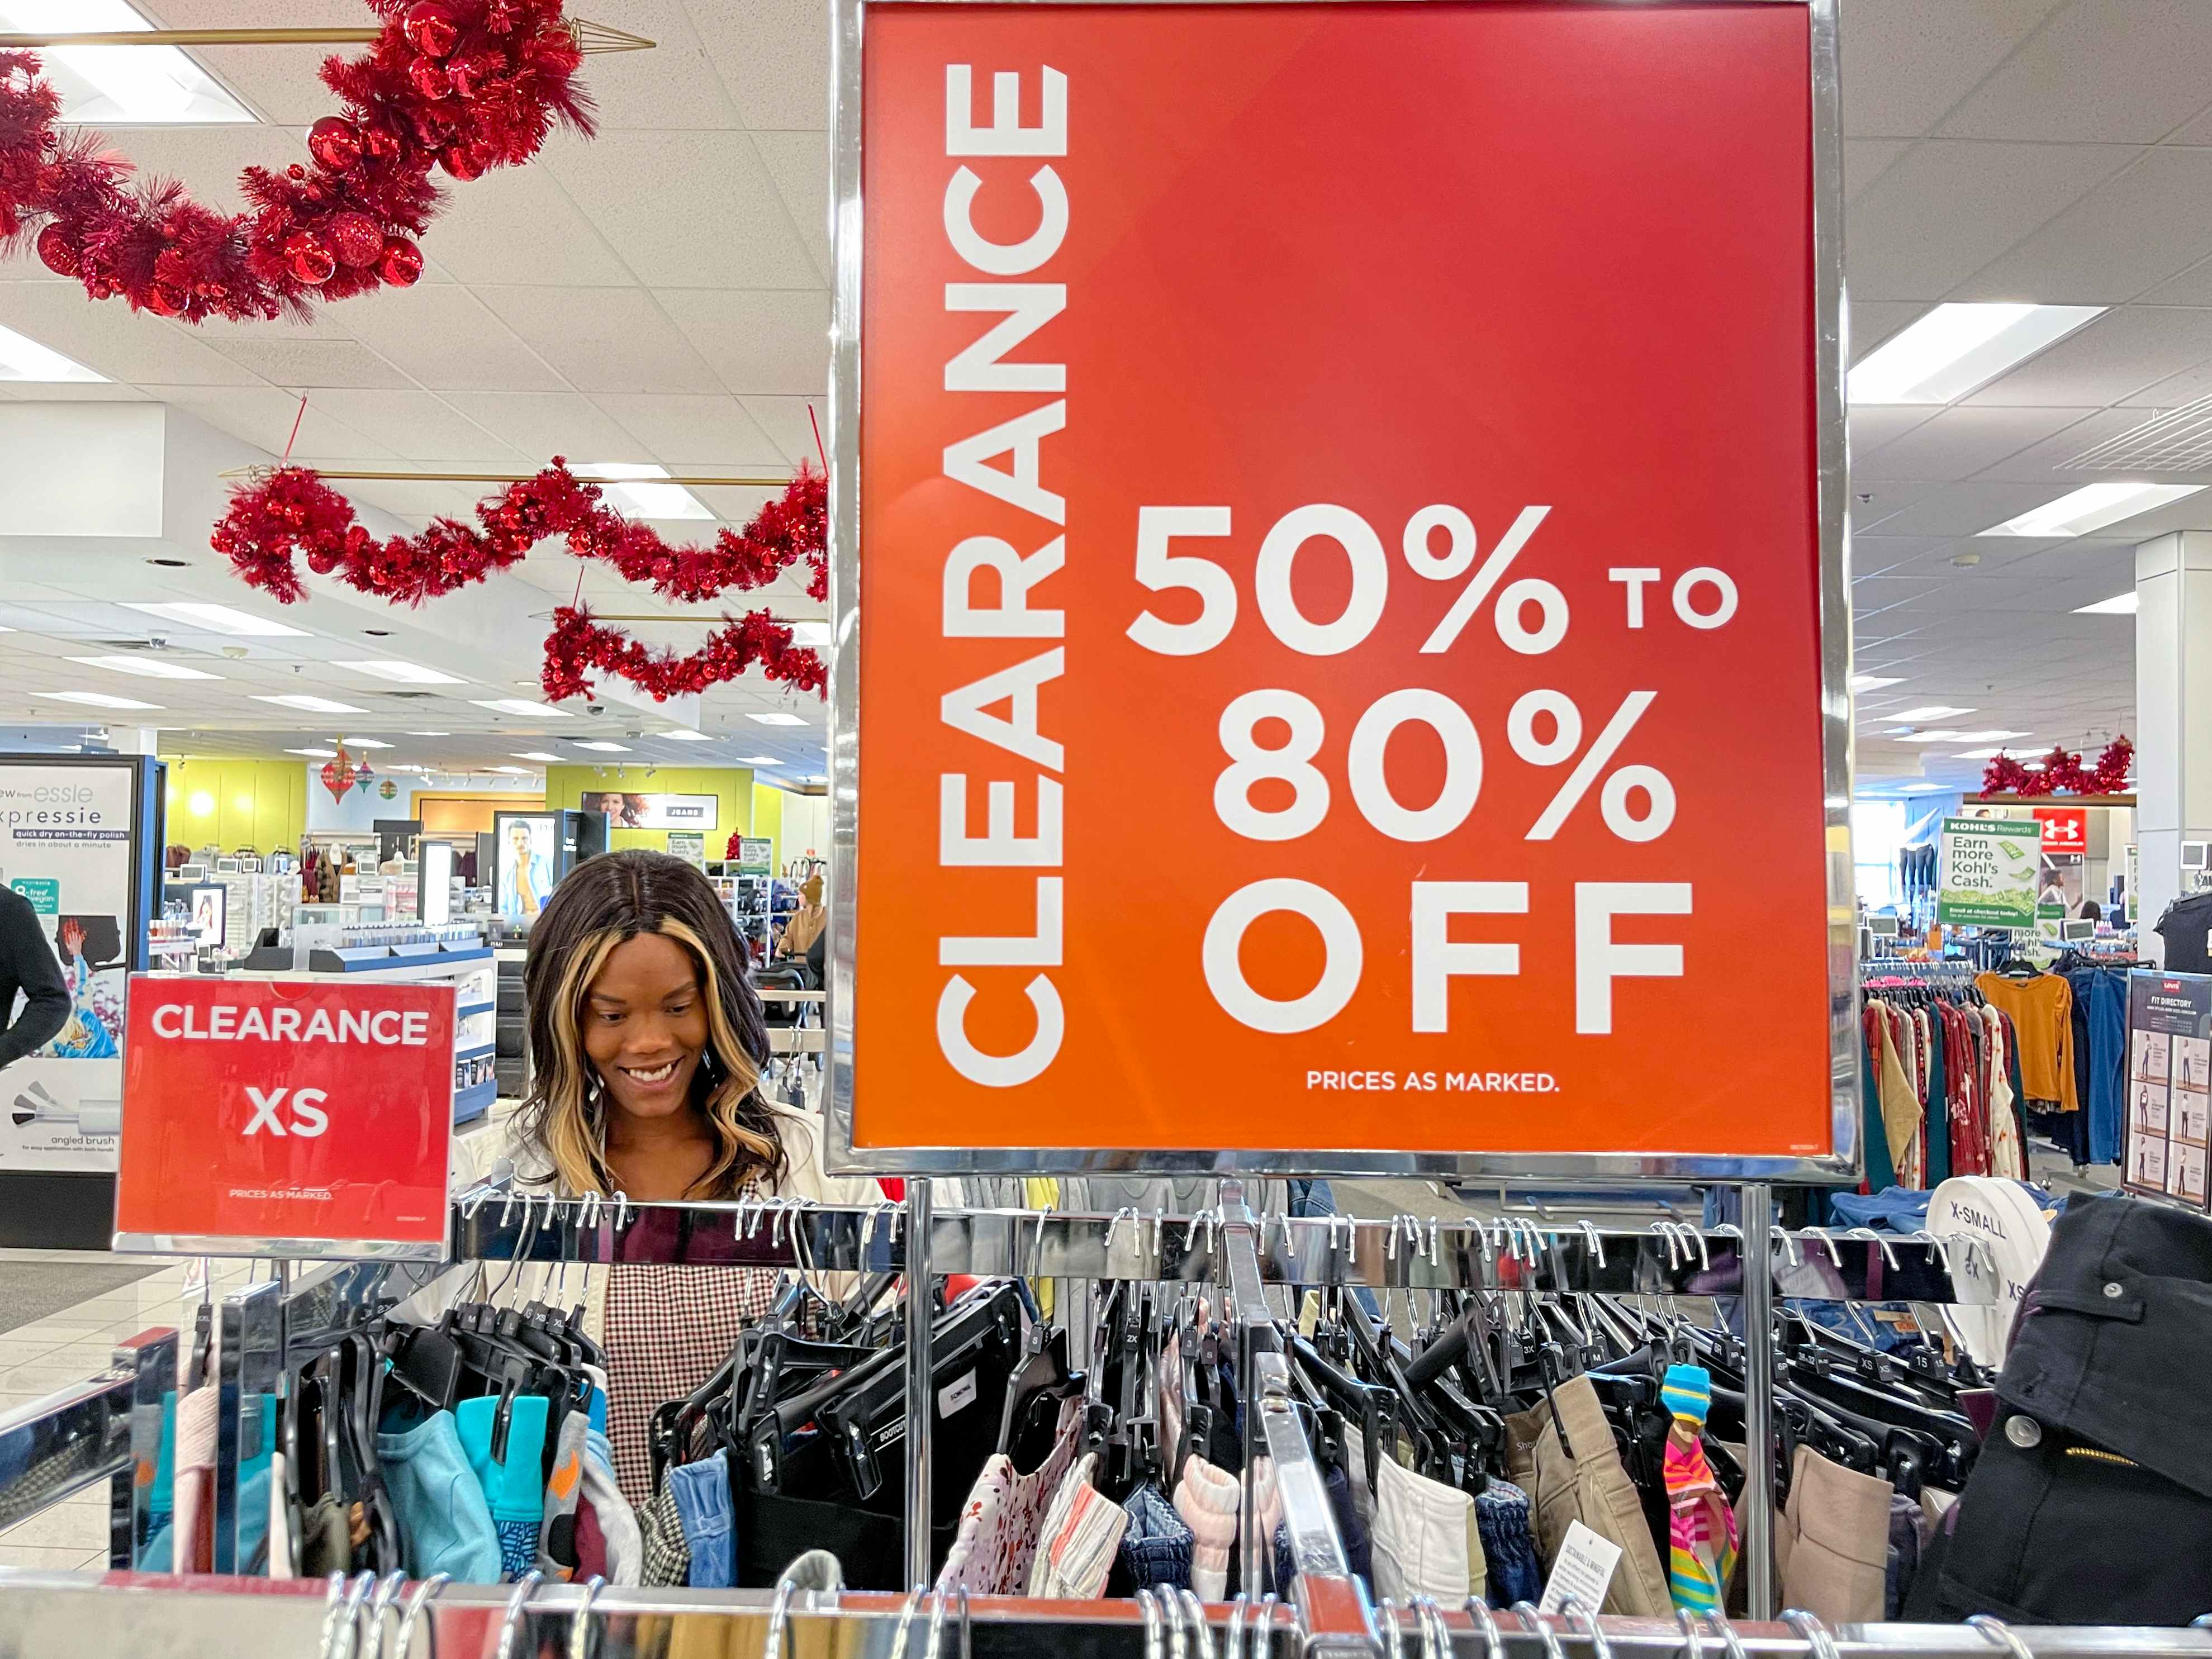 Friendly reminderDon't forget about the Kohl's clearance section.